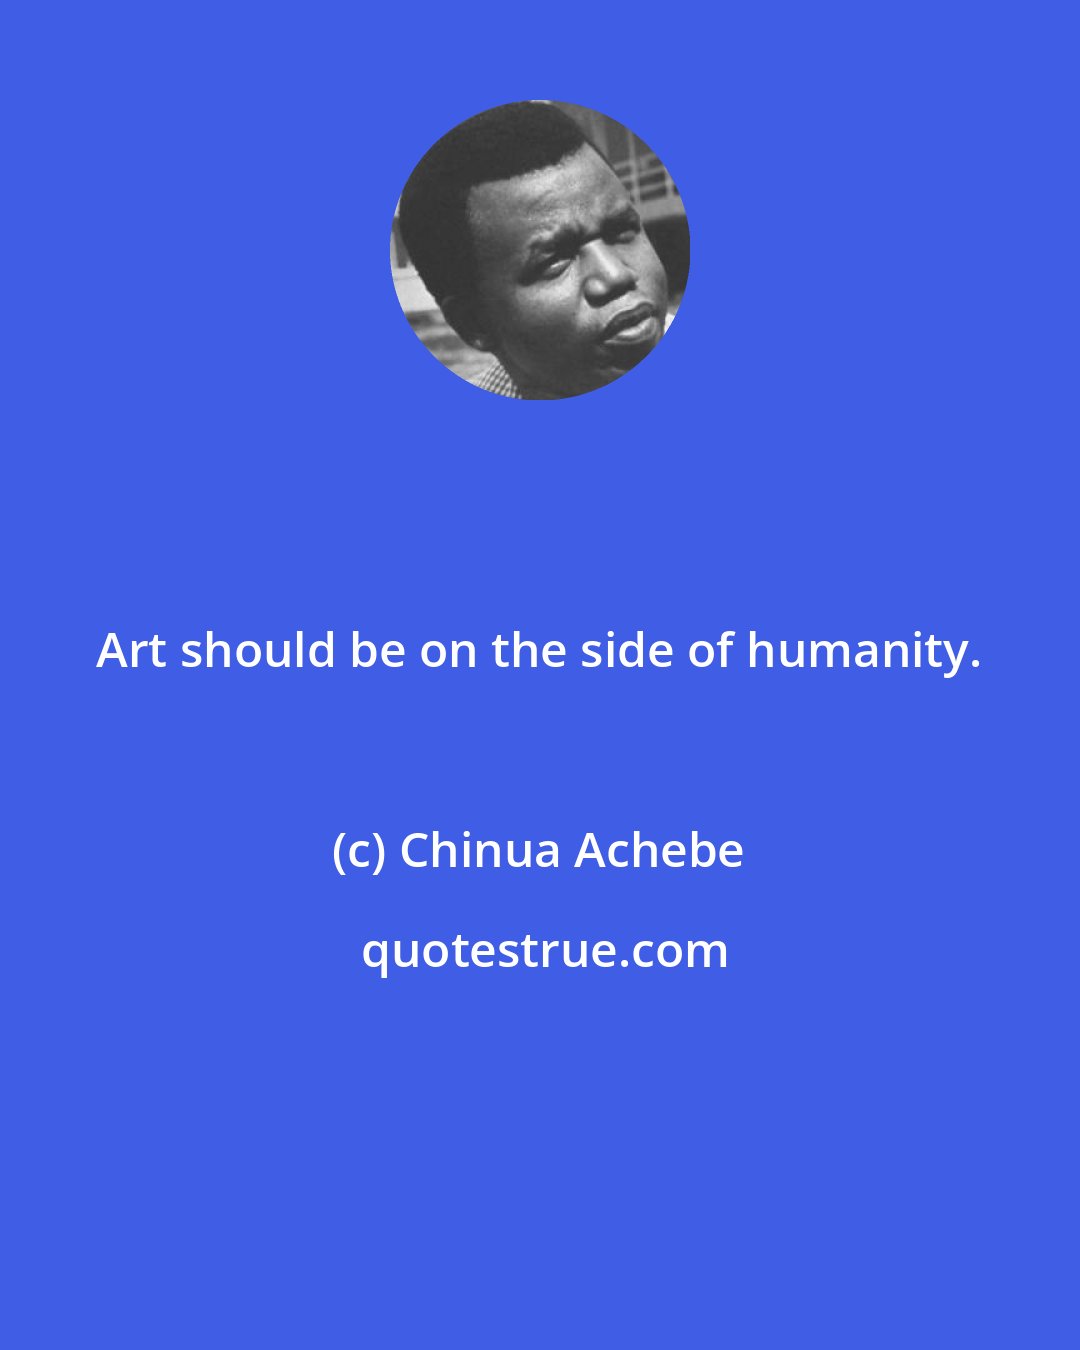 Chinua Achebe: Art should be on the side of humanity.